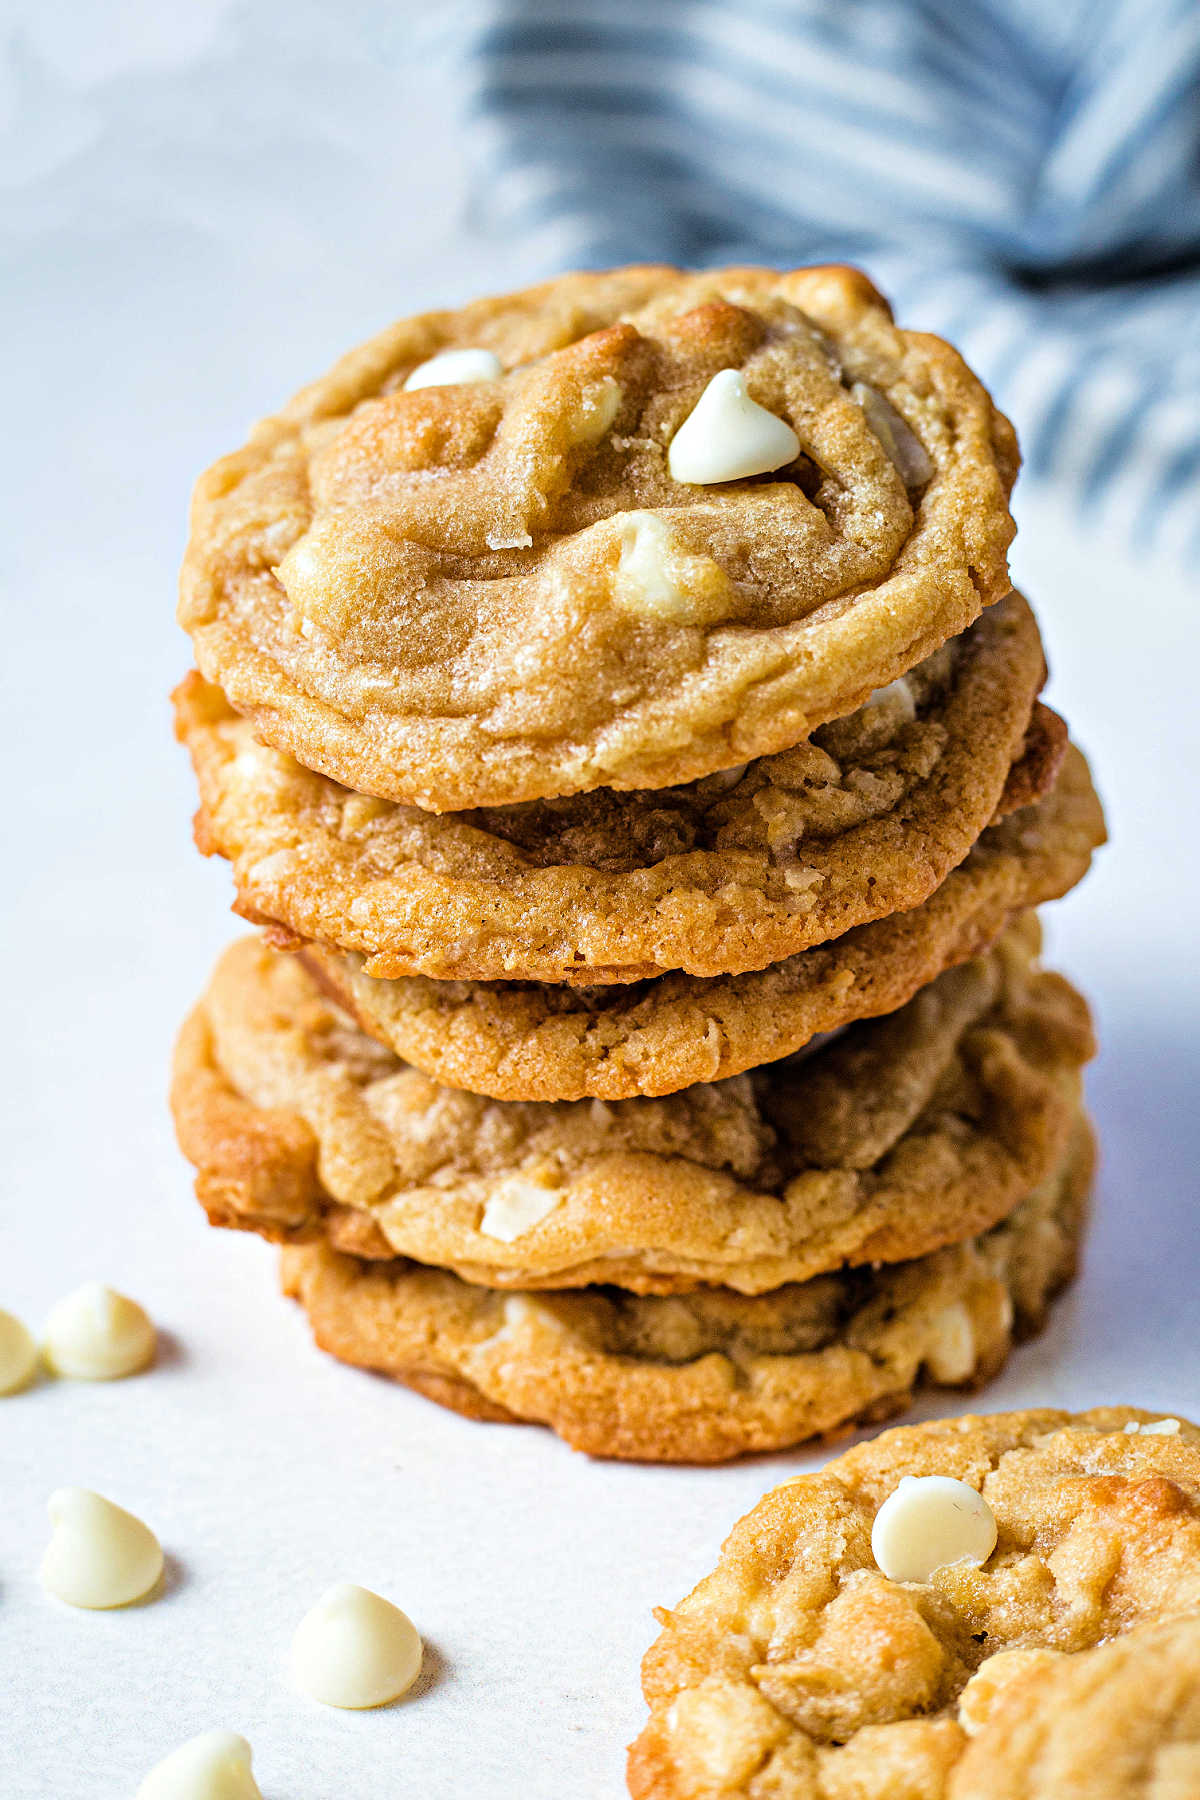 white chocolate macadamia nut cookies stacked on top of each other to make a tower with white chocolate chips scattered around.